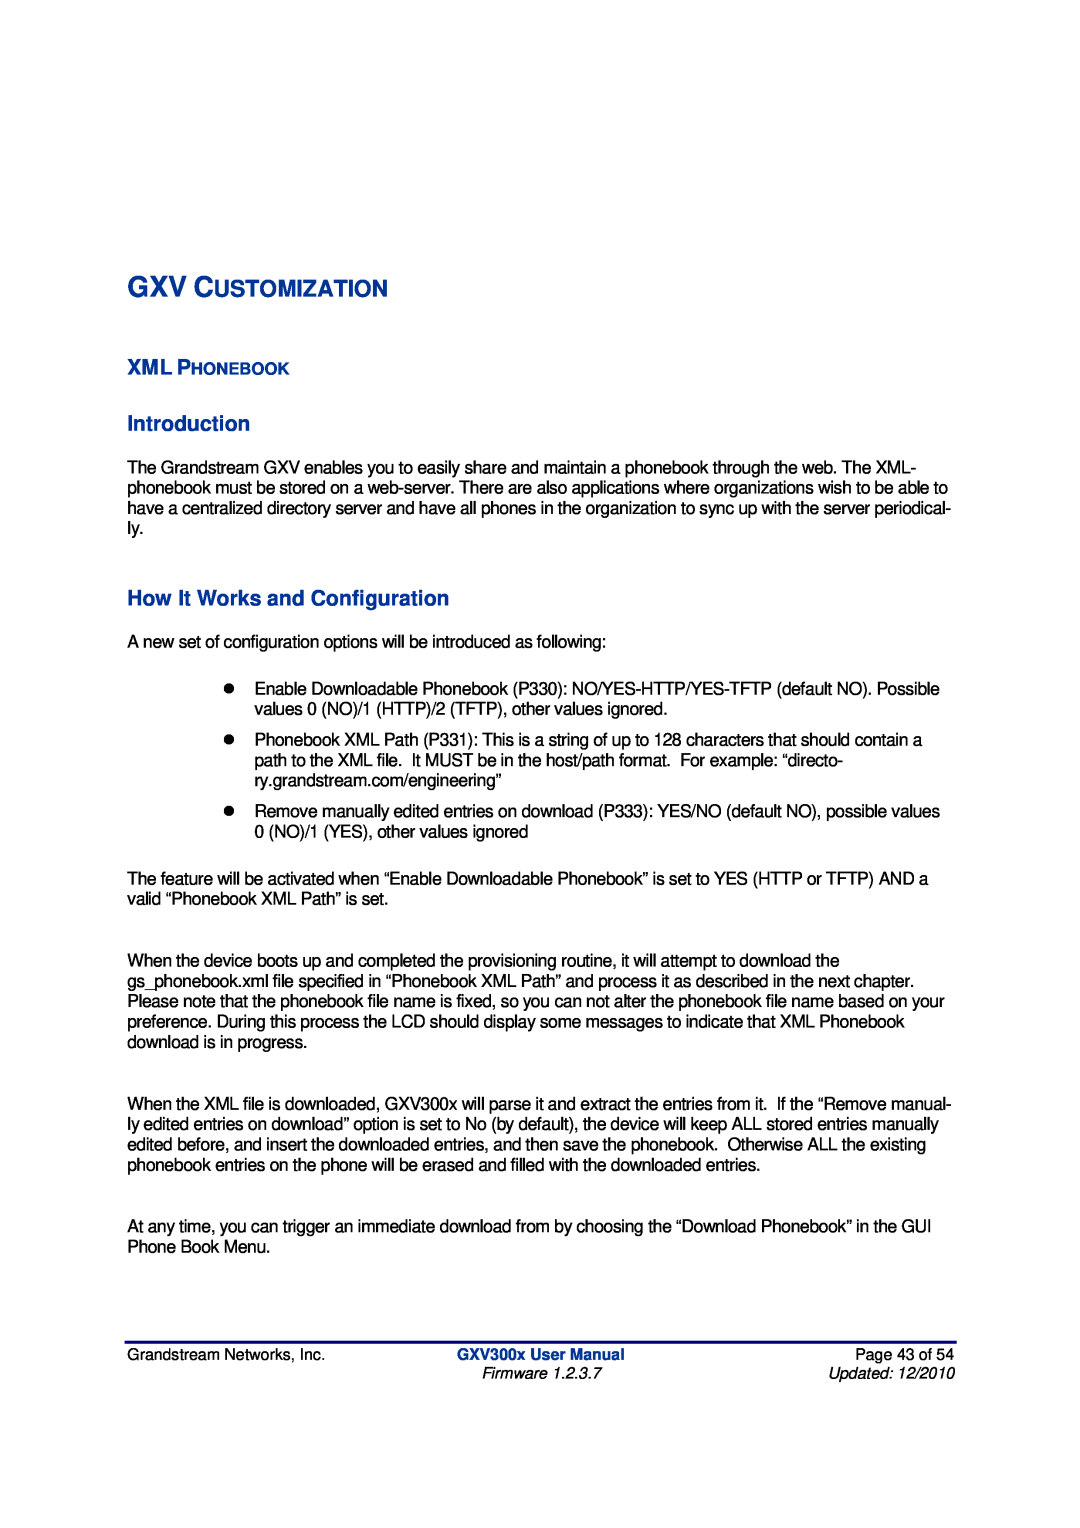 Grandstream Networks GXV300X manual Gxv Customization, Introduction, How It Works and Configuration 